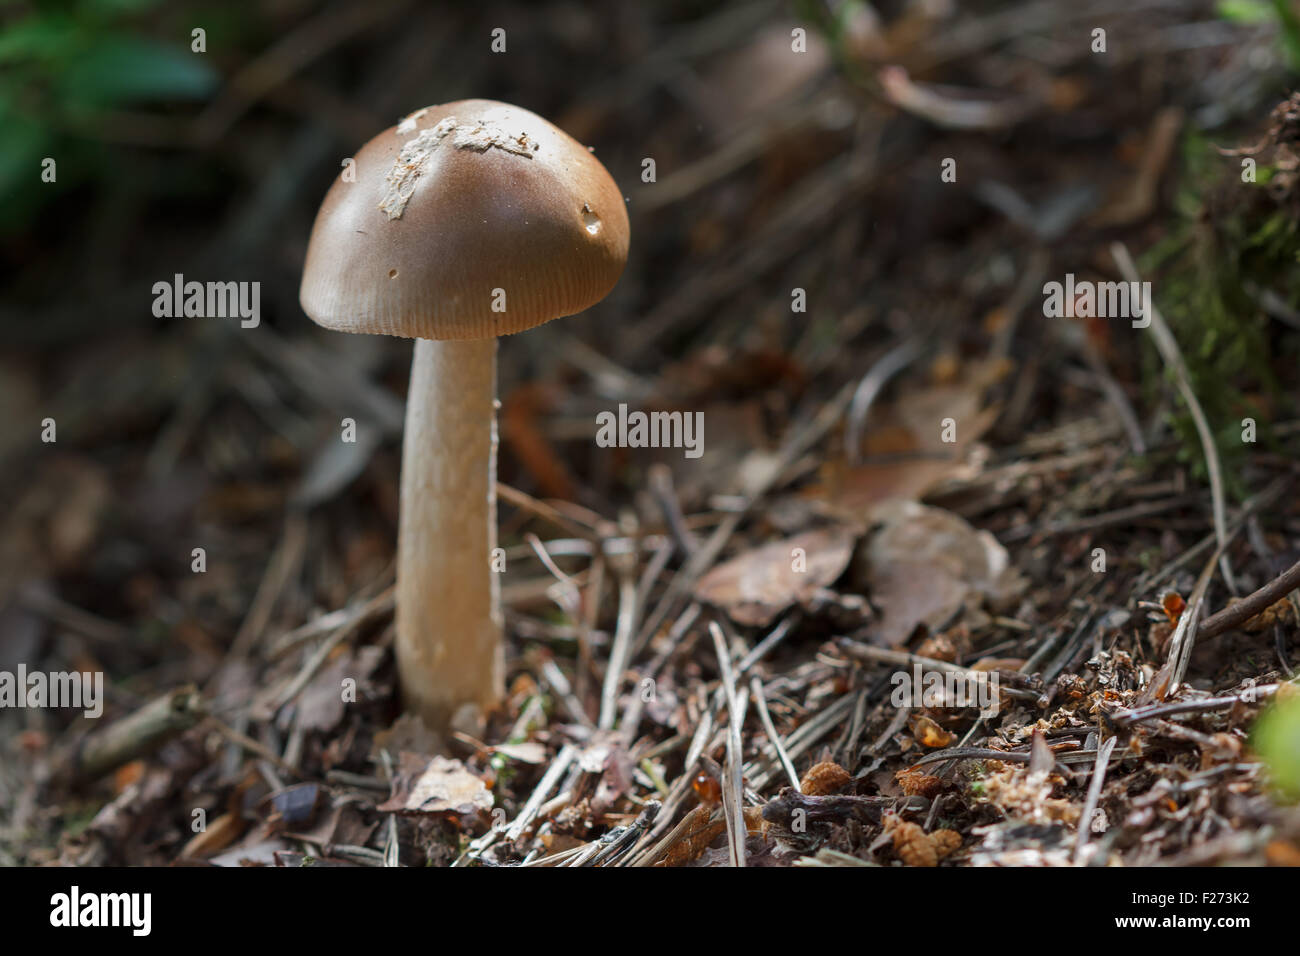 Small brown mushroom in the woods Stock Photo